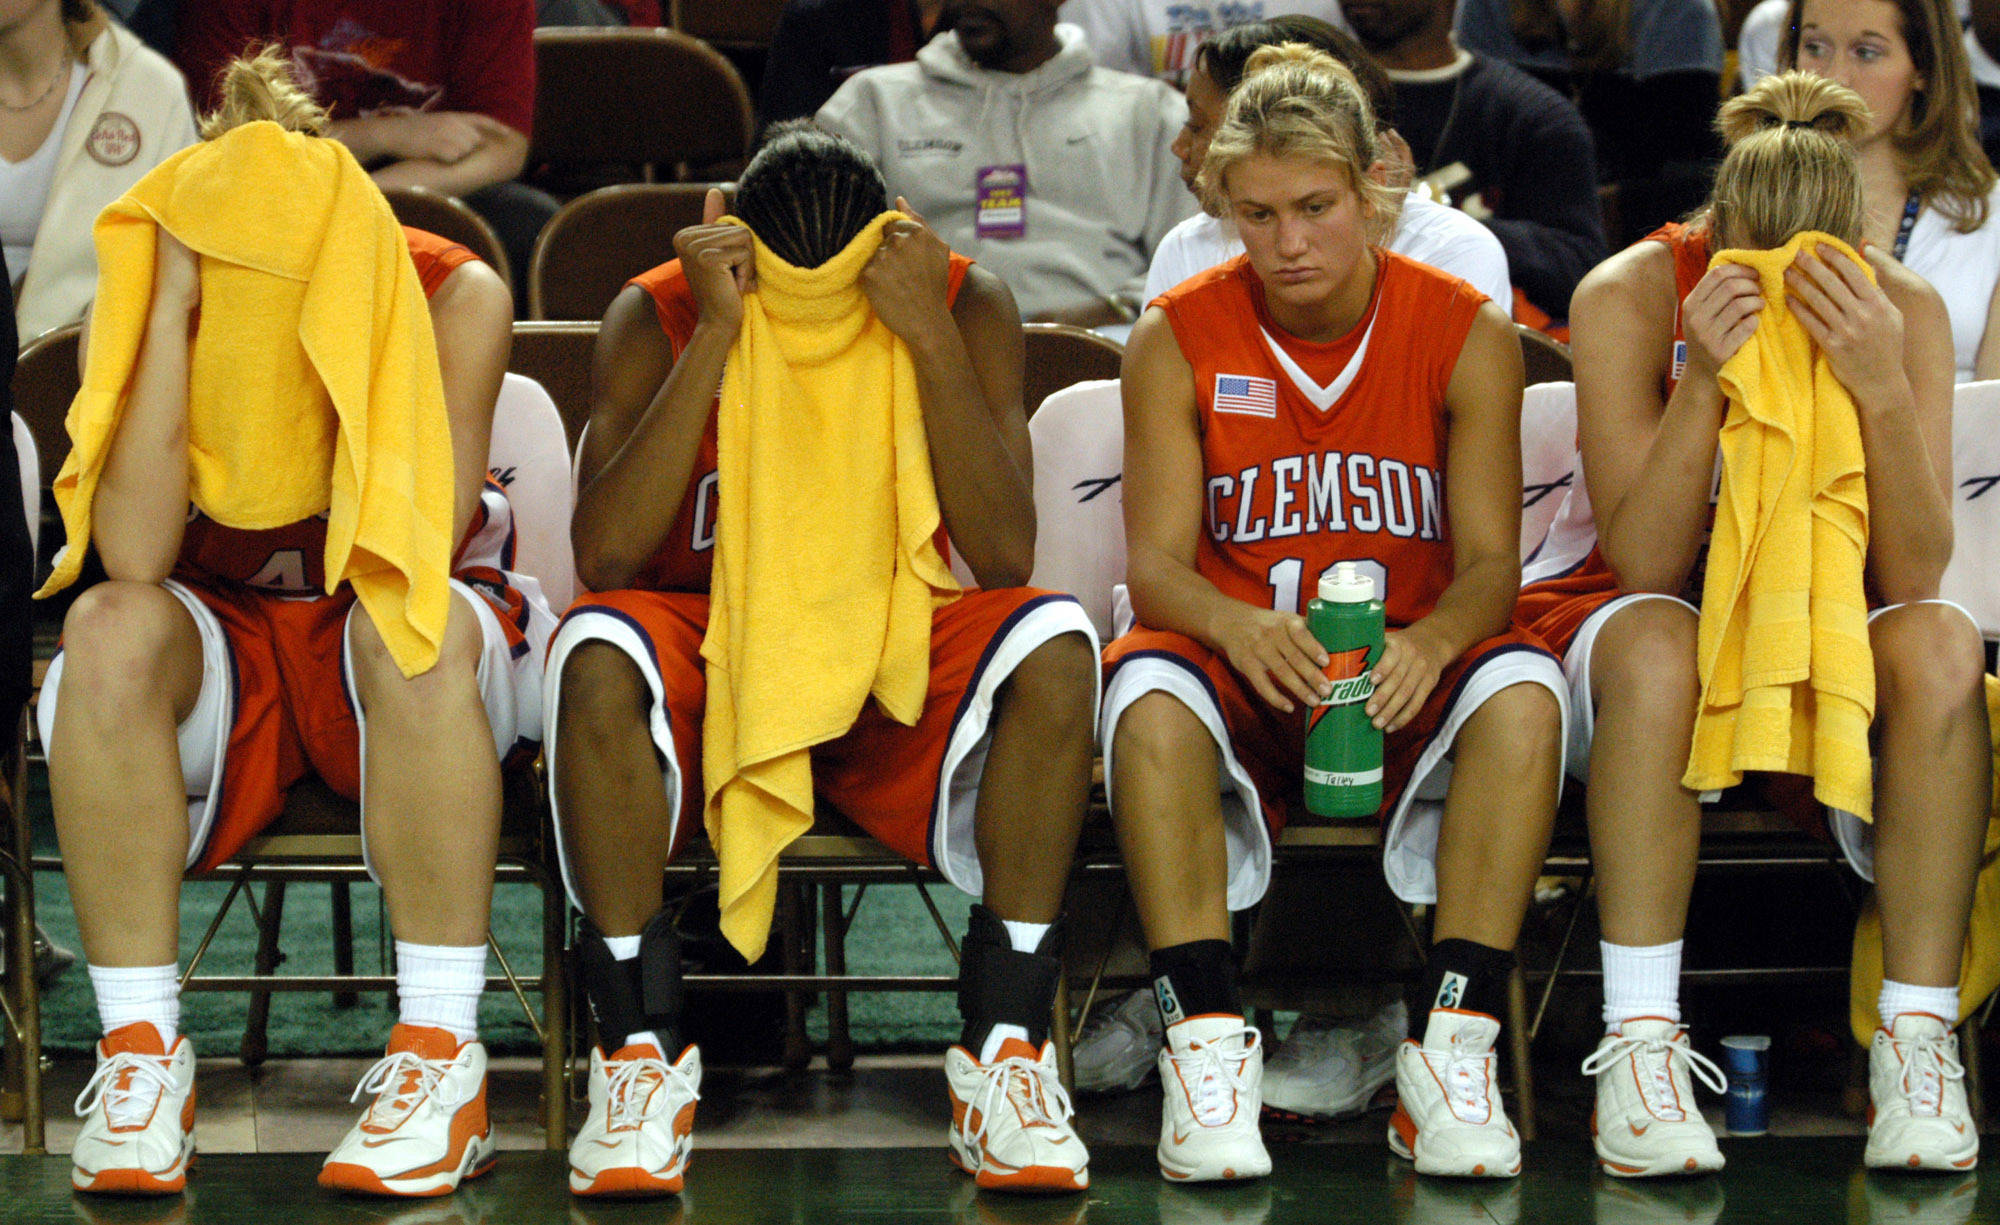 In this Nov. 26, 2003 photo, from left, Clemson’s Maggie Slosser, Lakeia Stokes, Julie Talley and Julie Aderhold sit on the bench after Clemson’s 61-58 loss to Alasaka-Anchorage in the championship game of the Great Alaska Shootout on in Anchorage, Alaska. Shootout fans over the years witnessed the best of college basketball, with Duke, North Carolina, Kentucky, Michigan State and UCLA winning titles, but the end is near. The 40th Shootout will be the last, a victim of changed rules and competition. (Michael Dinneen | The Associated Press File)